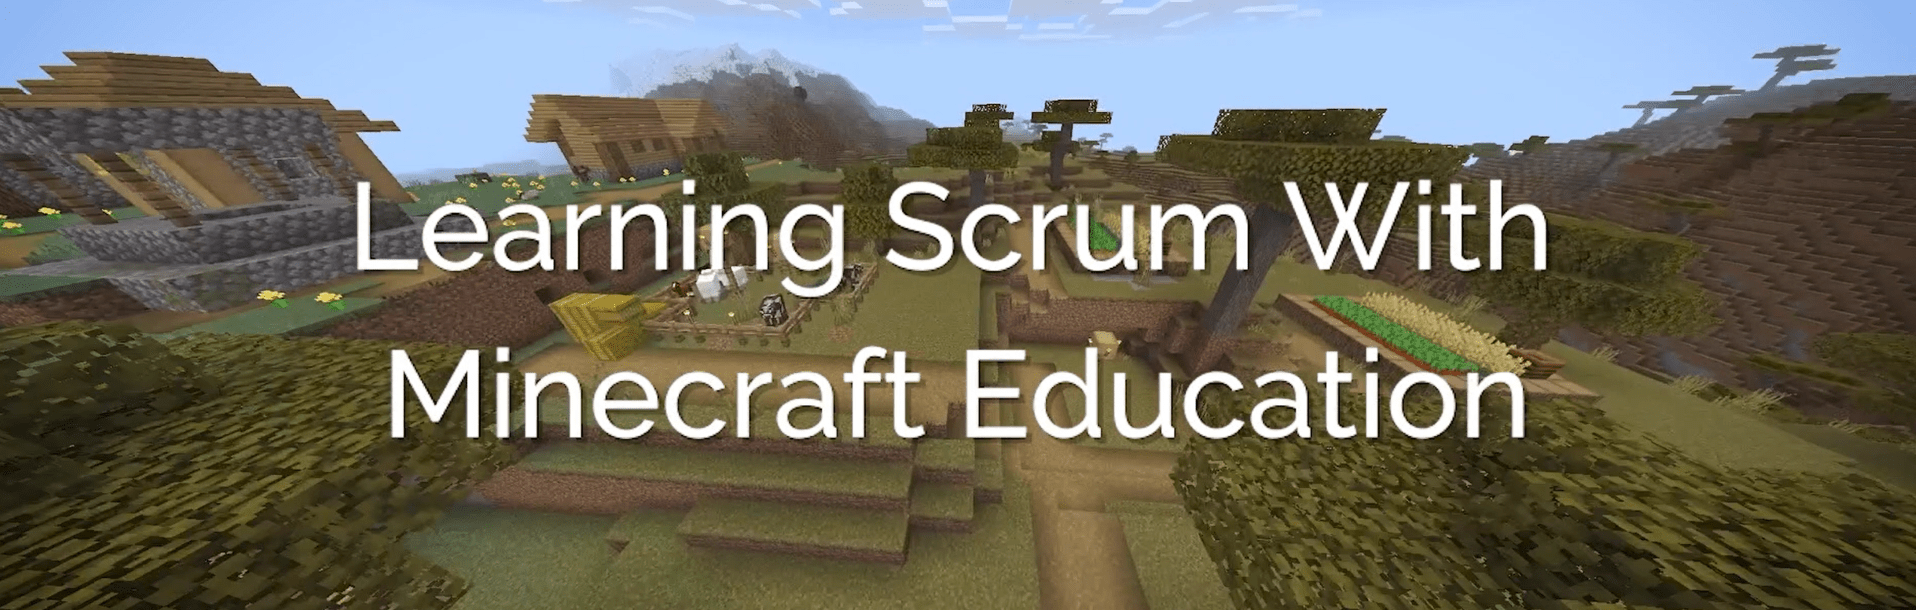 Learning Scrum With Minecraft Education